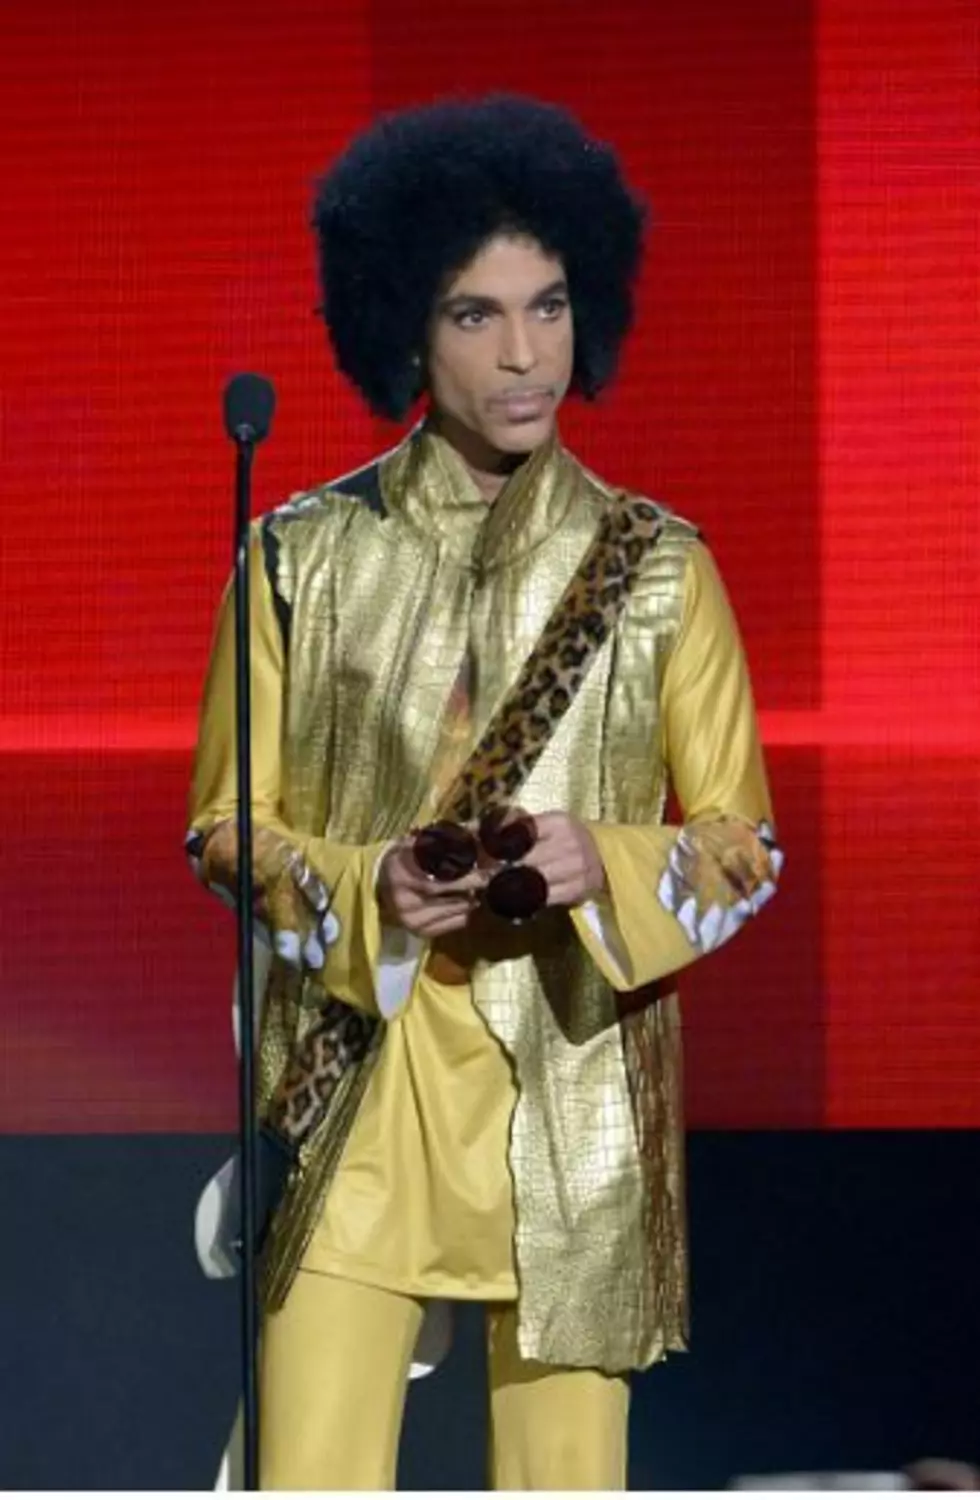 Missouri Man Claims To Be Prince’s Son And Requests DNA Test – Tha Wire [VIDEO]